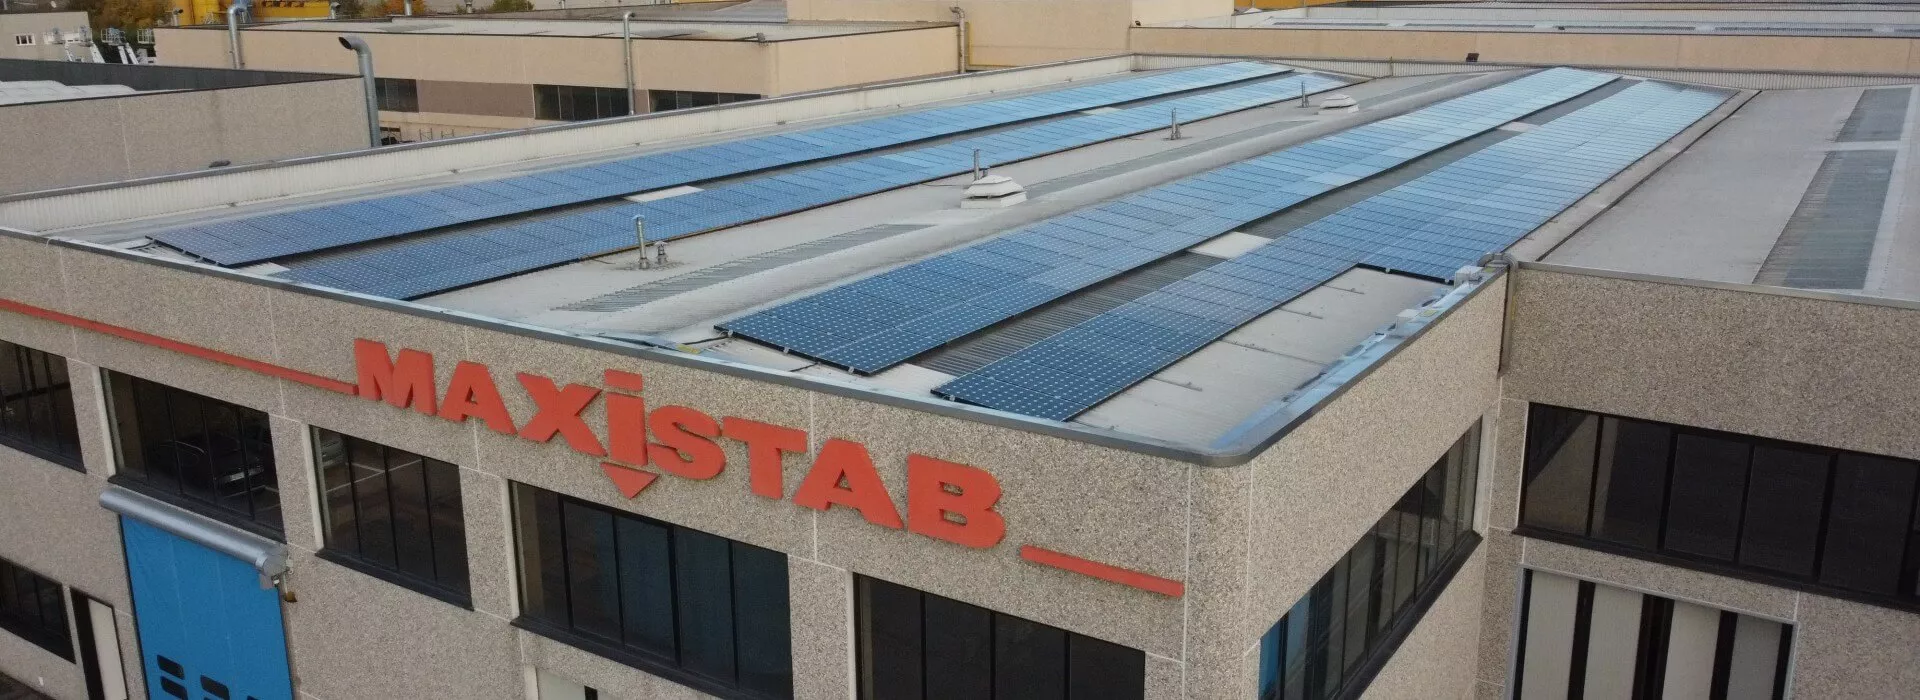 Energy efficient solar power installation on the second production plant of Next Hydraulics